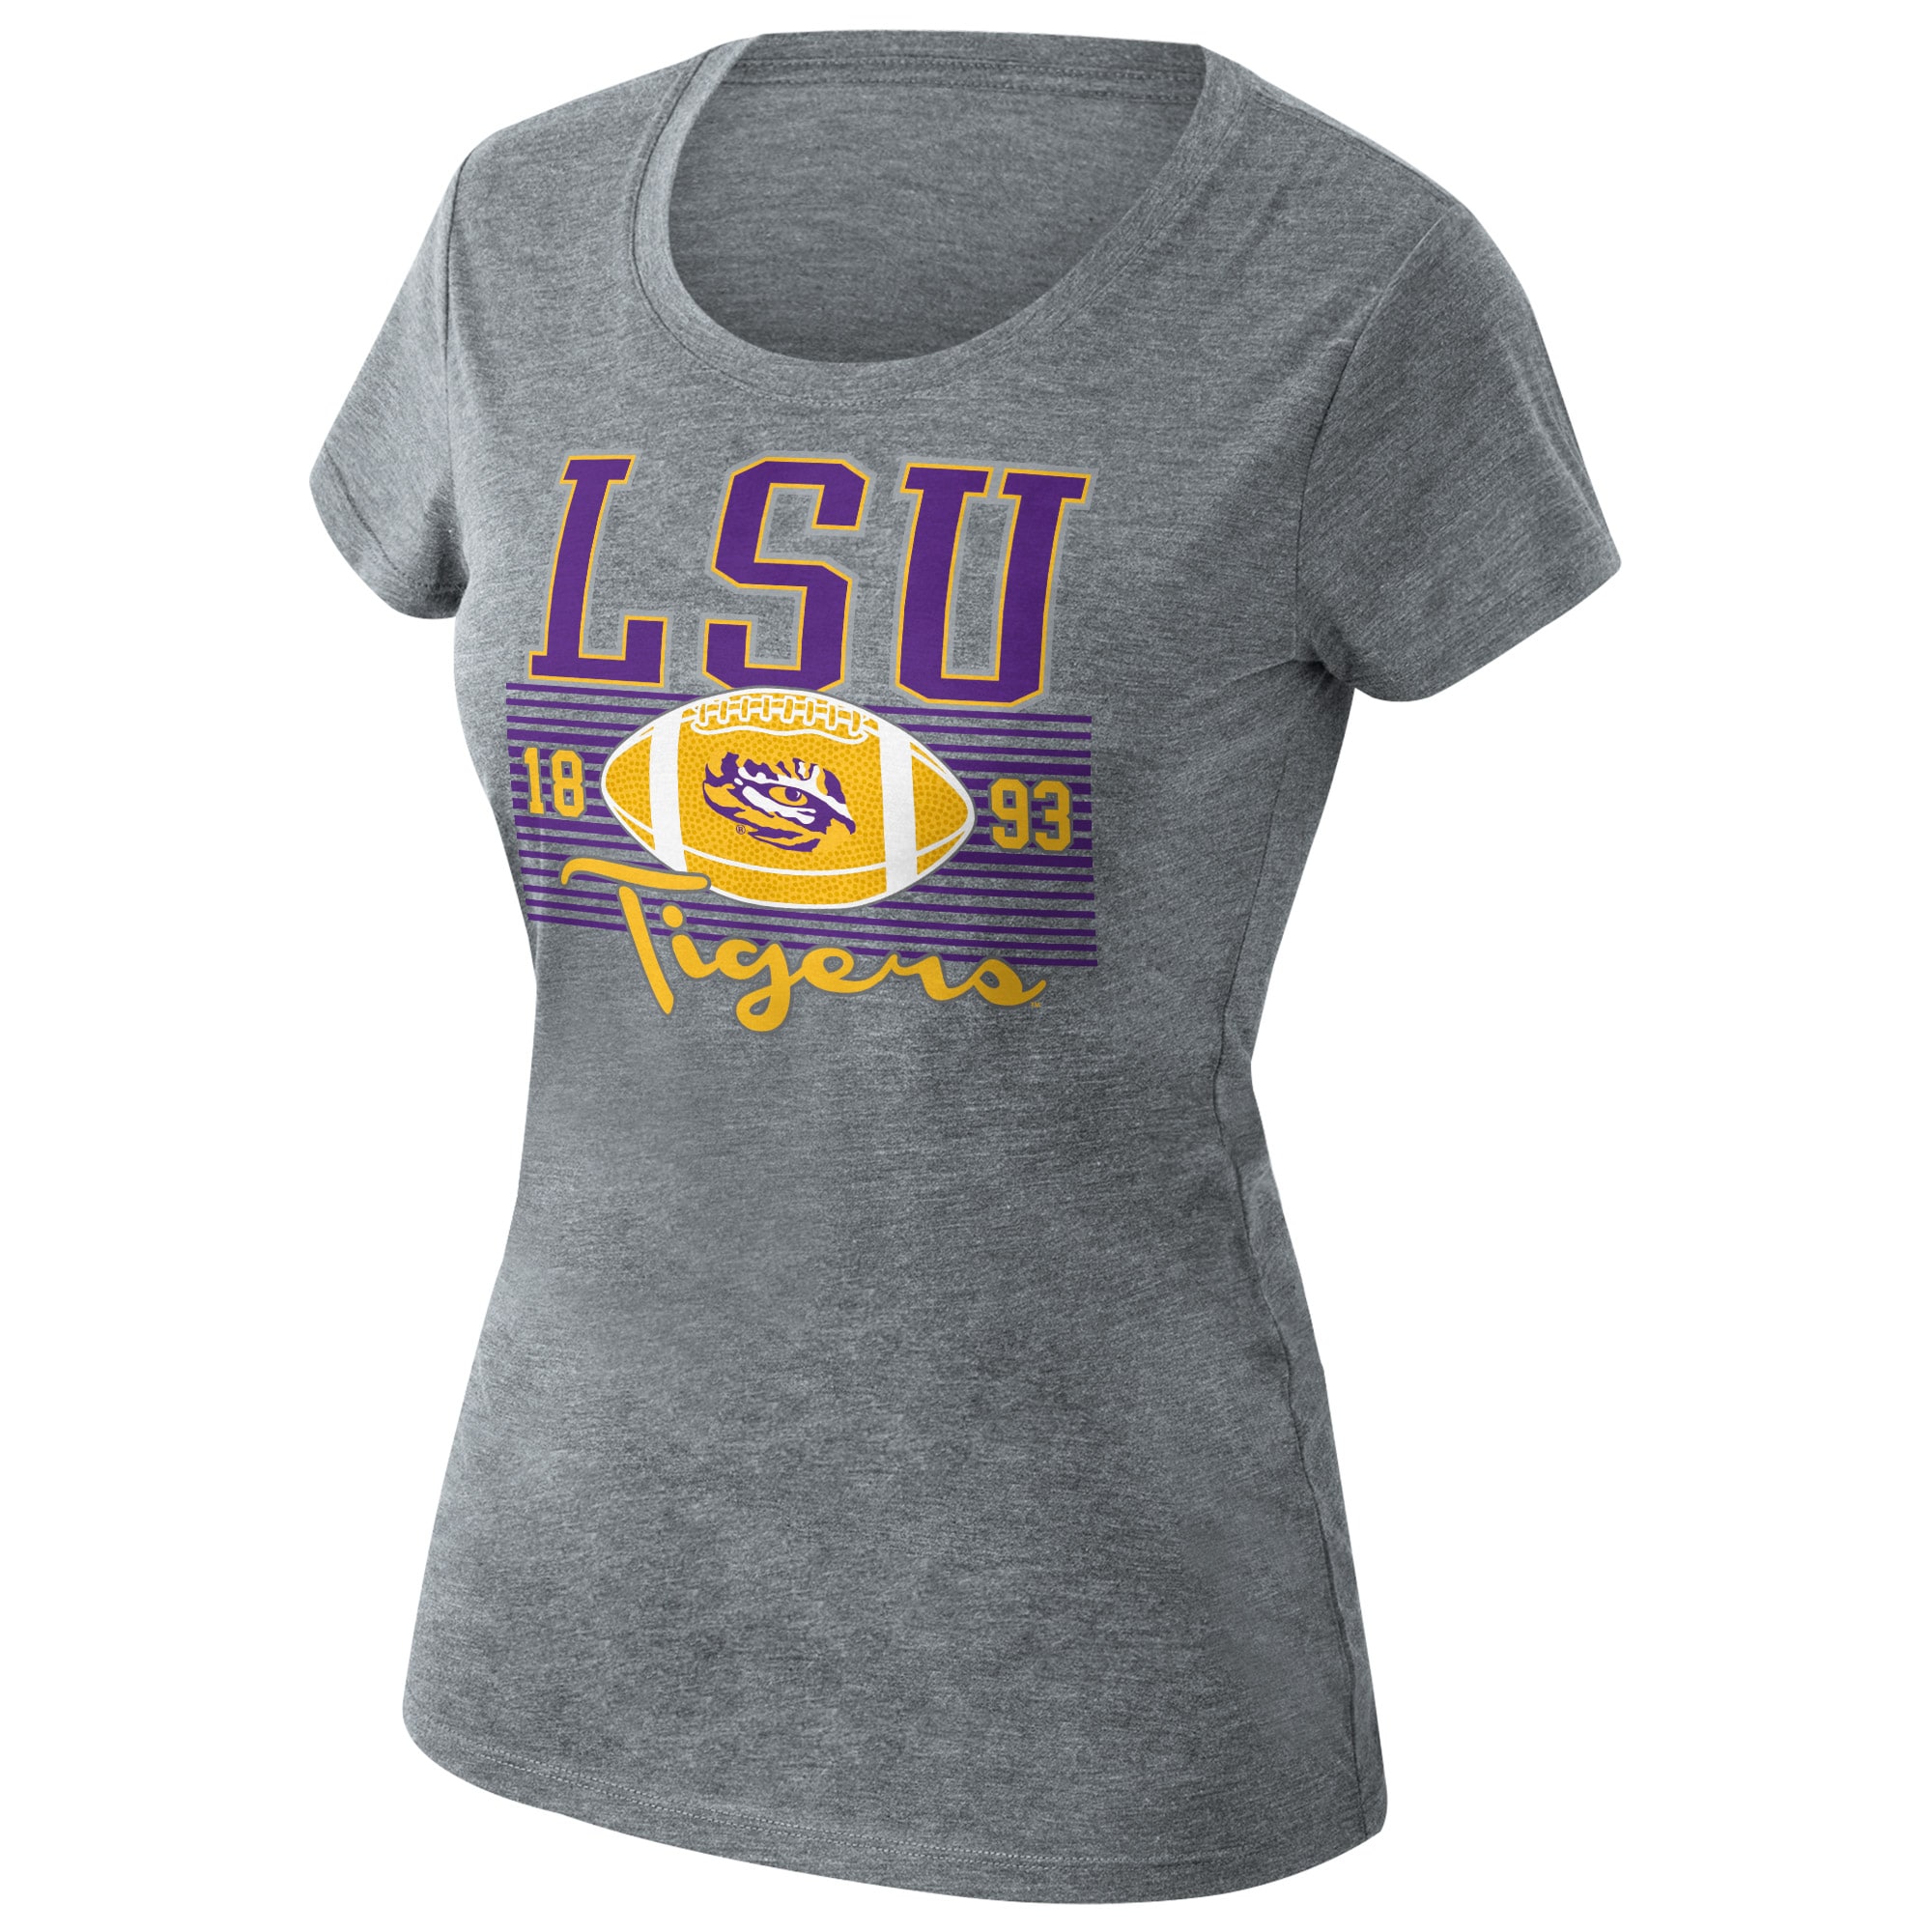 Women's Heathered Gray LSU Tigers Sideline Scoop Neck T-Shirt - image 2 of 3